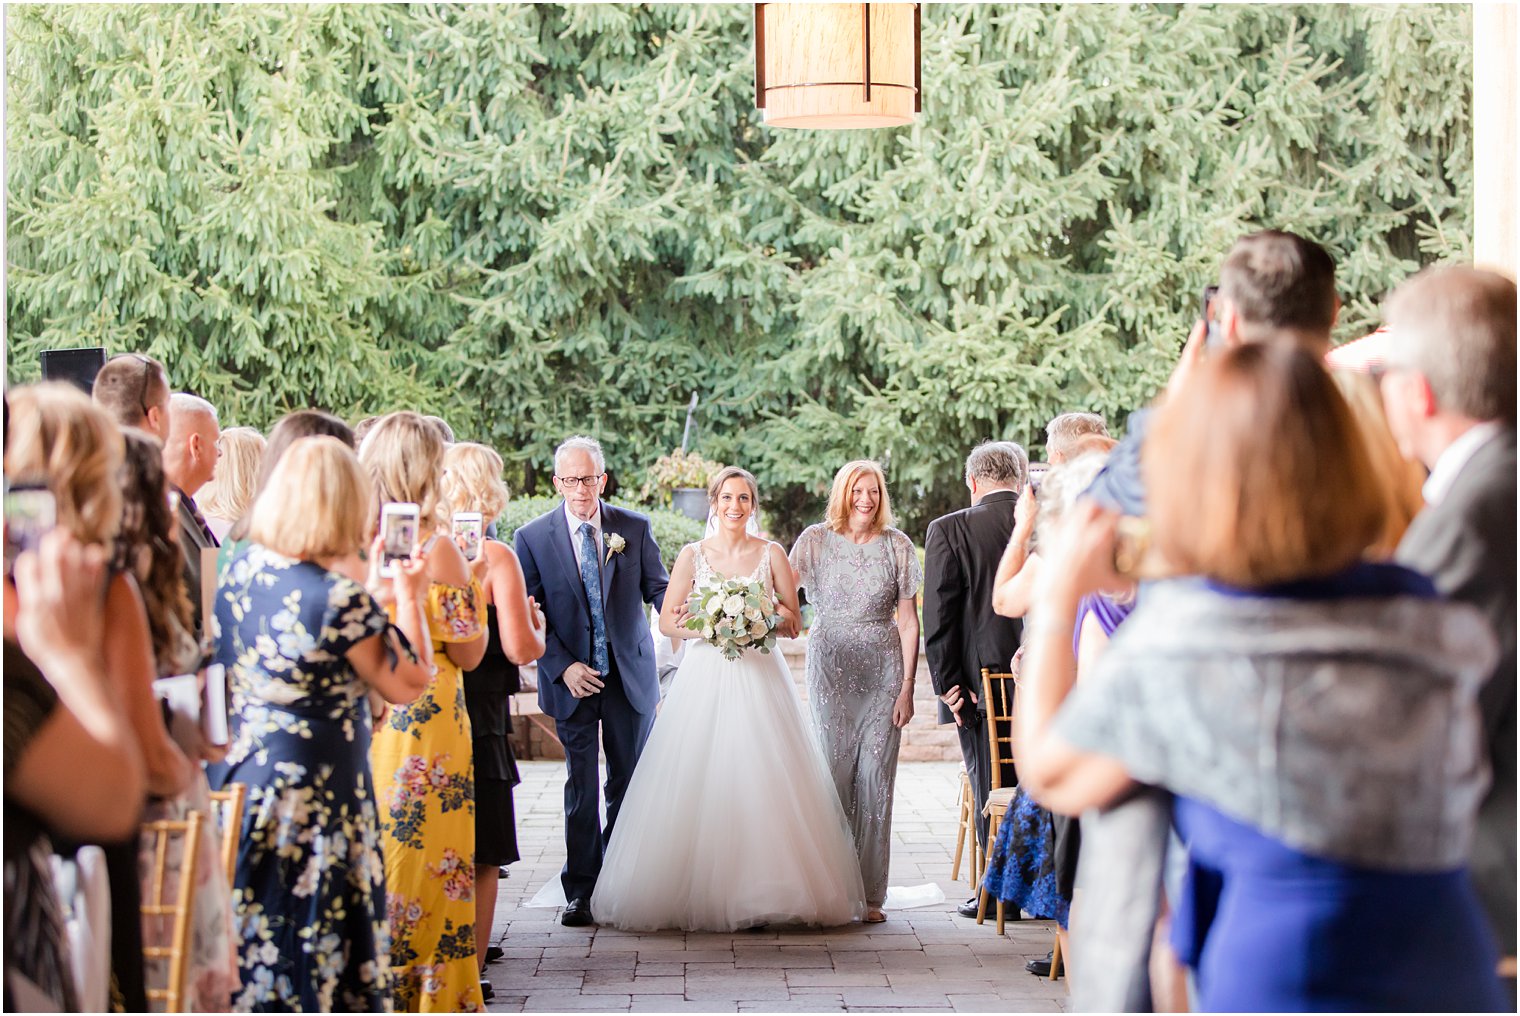 Bride walking down the aisle | Wedding ceremony at Stone House at Stirling Ridge Wedding Photos by NJ Wedding Photographers Idalia Photography